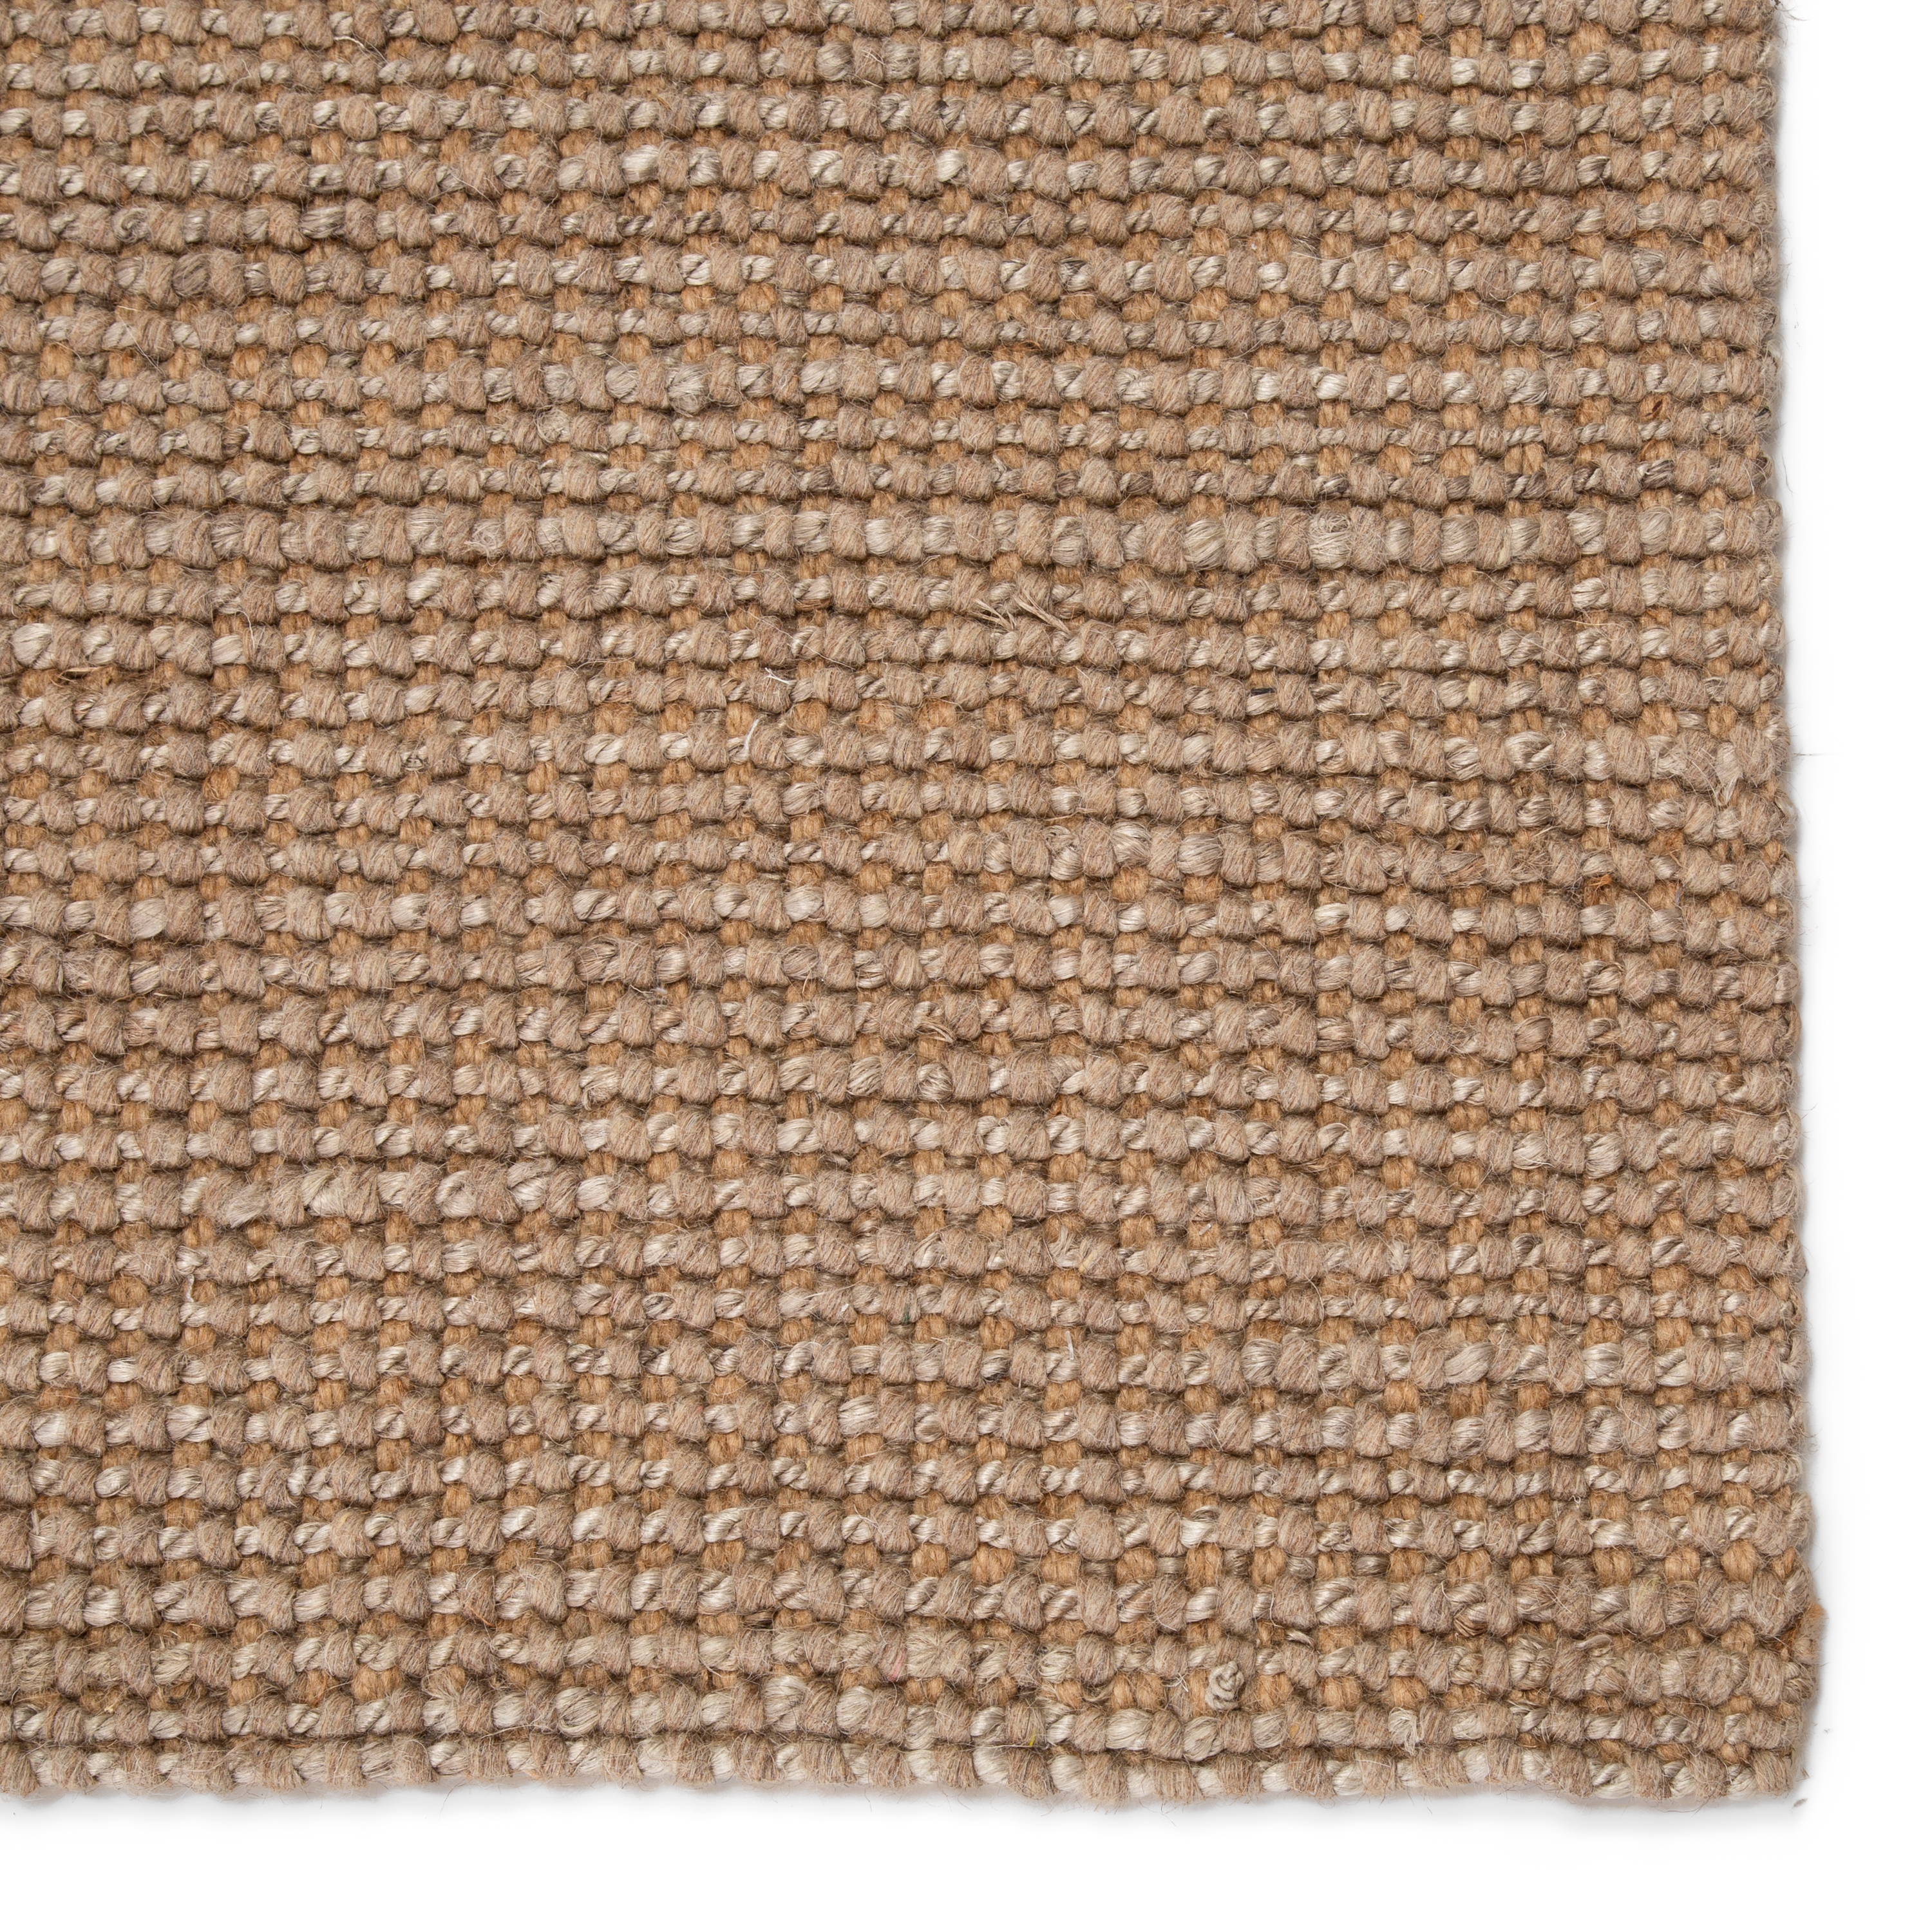 Beech Natural Solid Tan/ Taupe Area Rug (9'X12') - Image 3